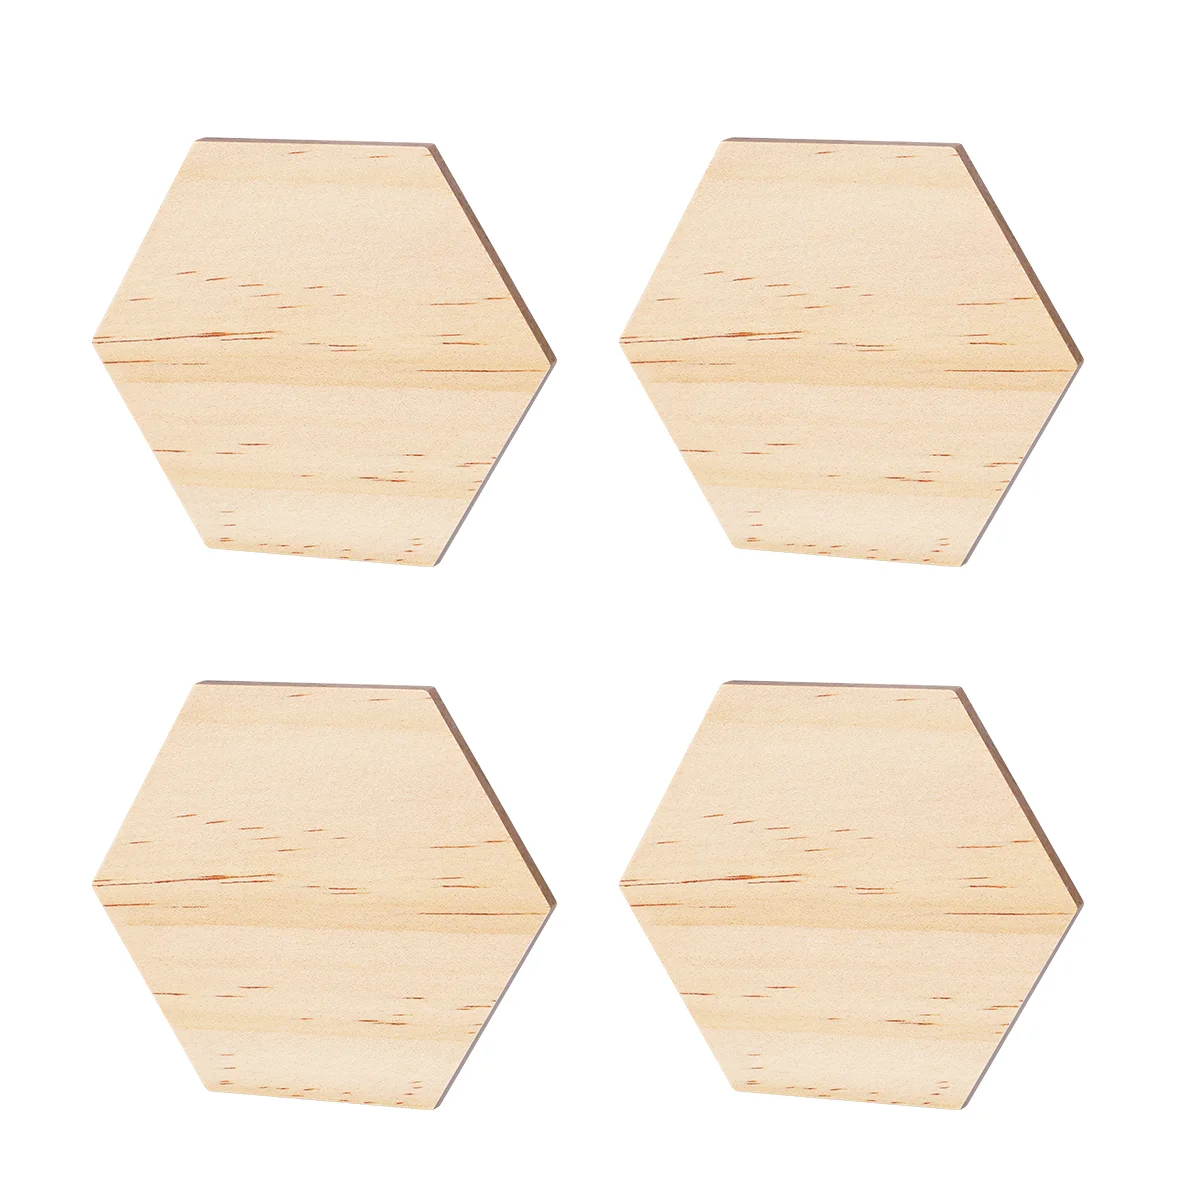 

Wood Hexagon Unfinished Wooden Pieces Cutouts Slices Natural Crafts Craft Wall Shapes Discs Blank Decorativechips Ornament Door